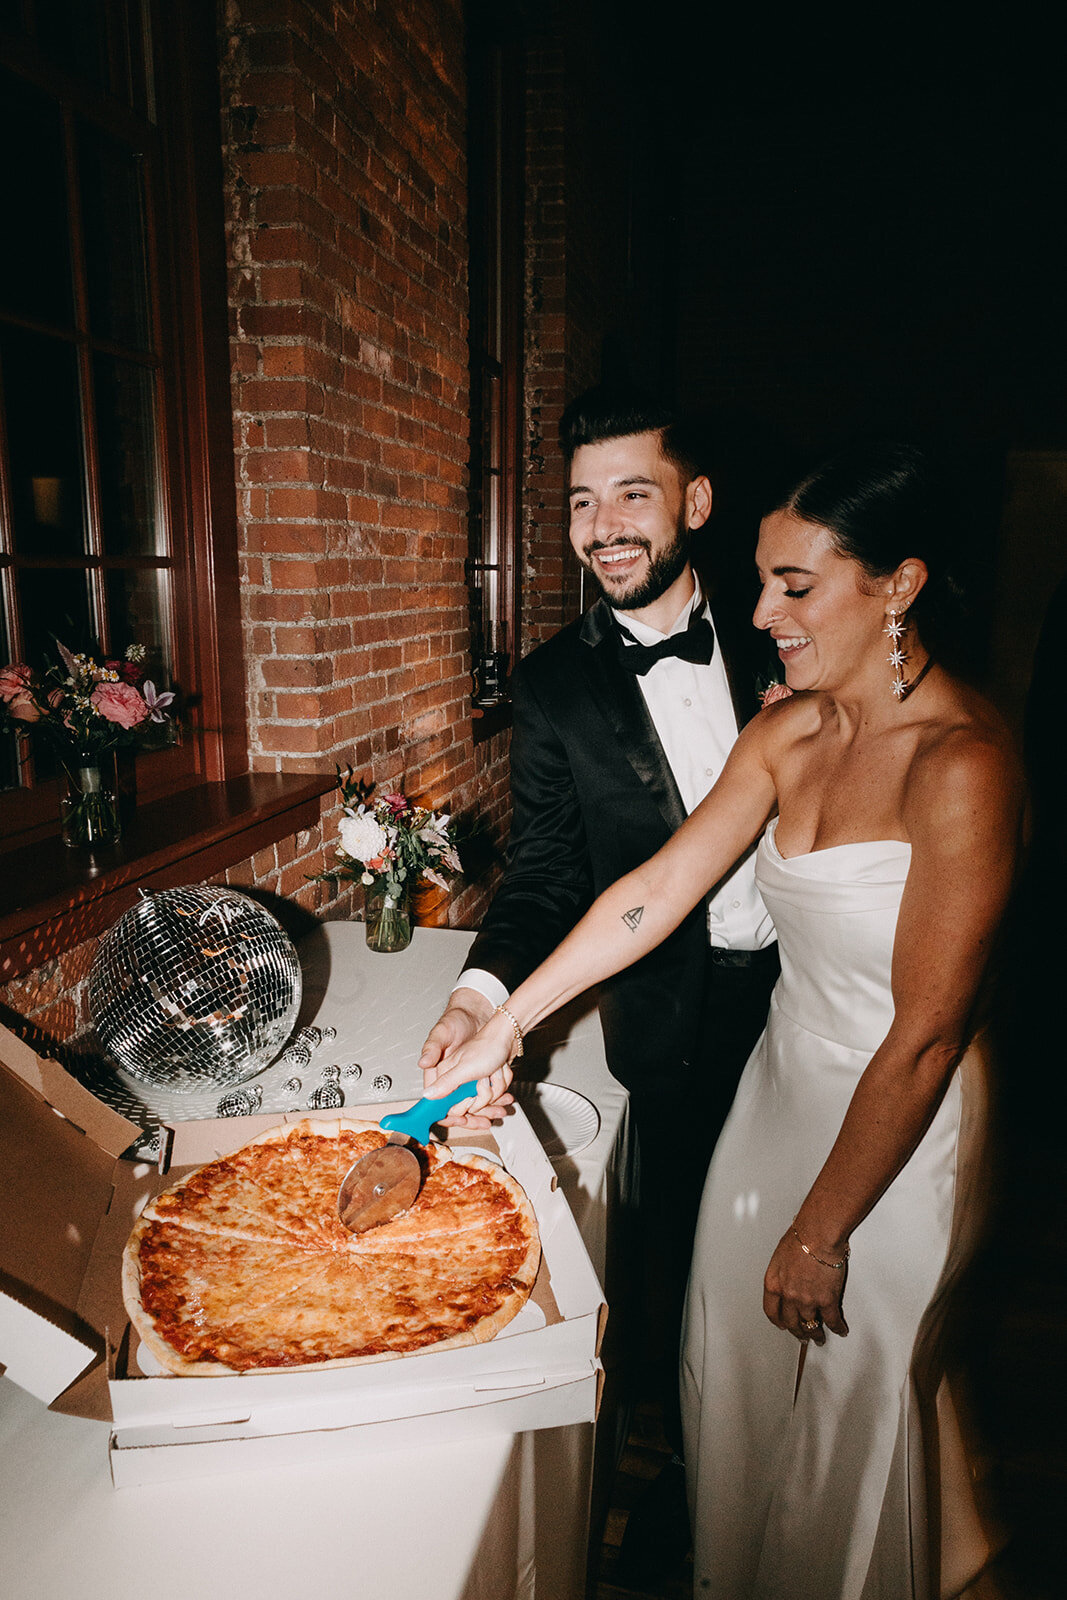 City-Winery-Hudson-NY-pizza-cake-Erica-Renee-Beauty-bride-natural-wedding-hair-makeup-clean-artist-stylist-Asian